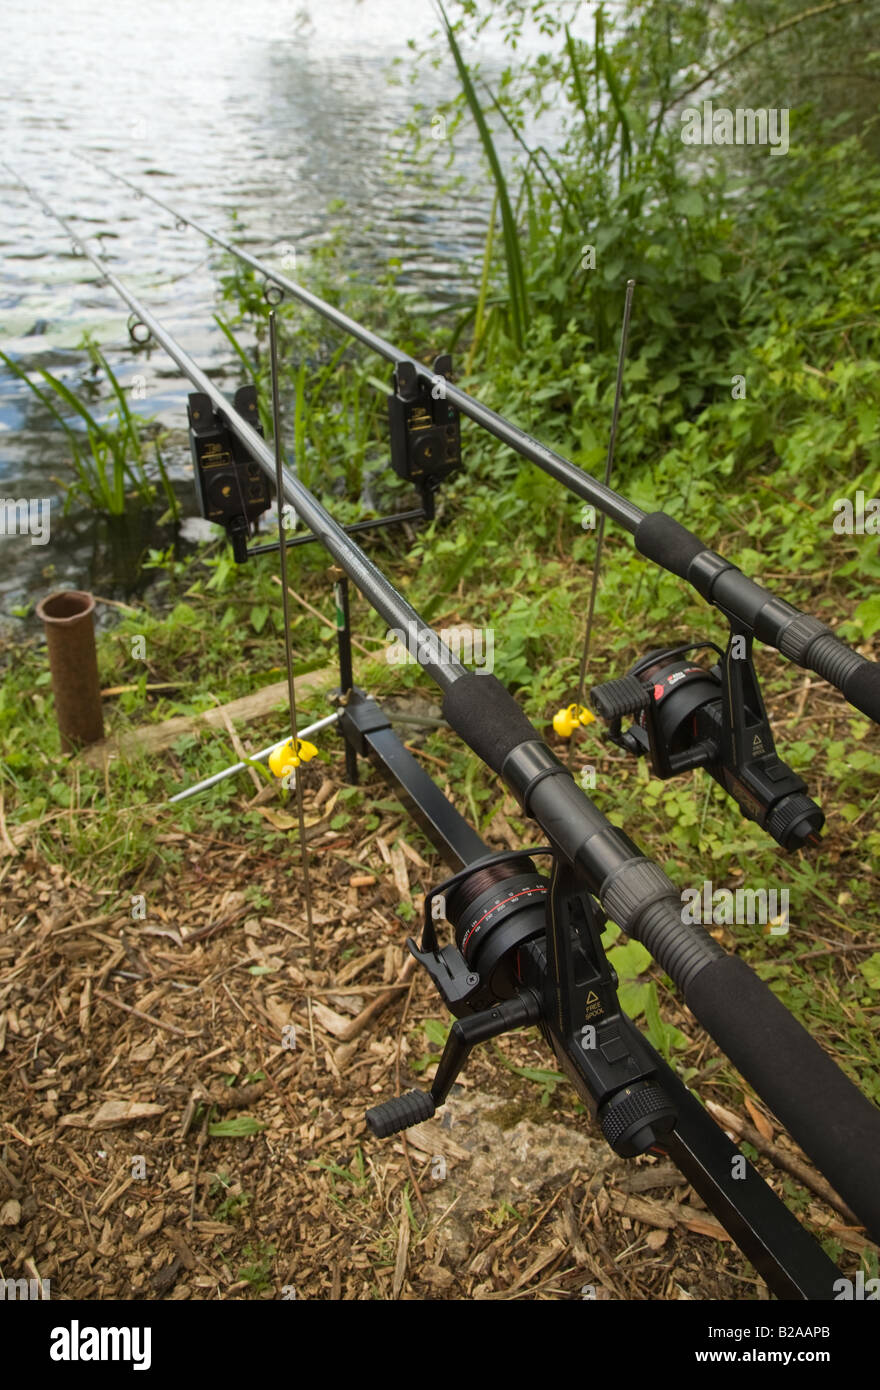 https://c8.alamy.com/comp/B2AAPB/fishing-rods-and-reels-set-up-with-electronic-bite-alarms-to-catch-B2AAPB.jpg